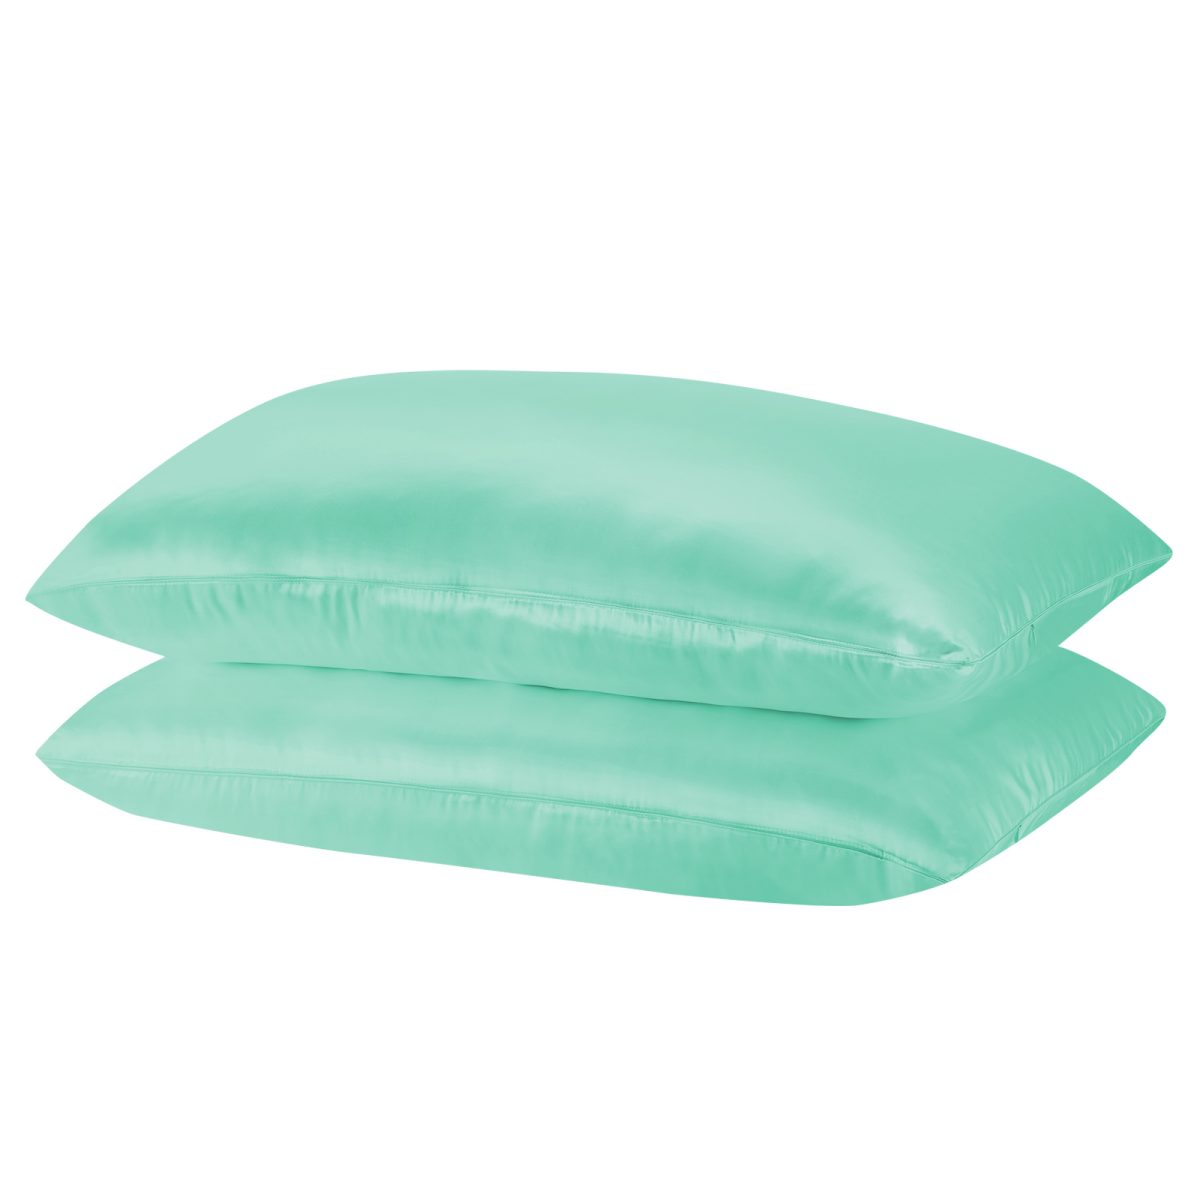 Royal Comfort Mulberry Soft Silk Hypoallergenic Pillowcase Twin Pack 51 x 76cm – Mint